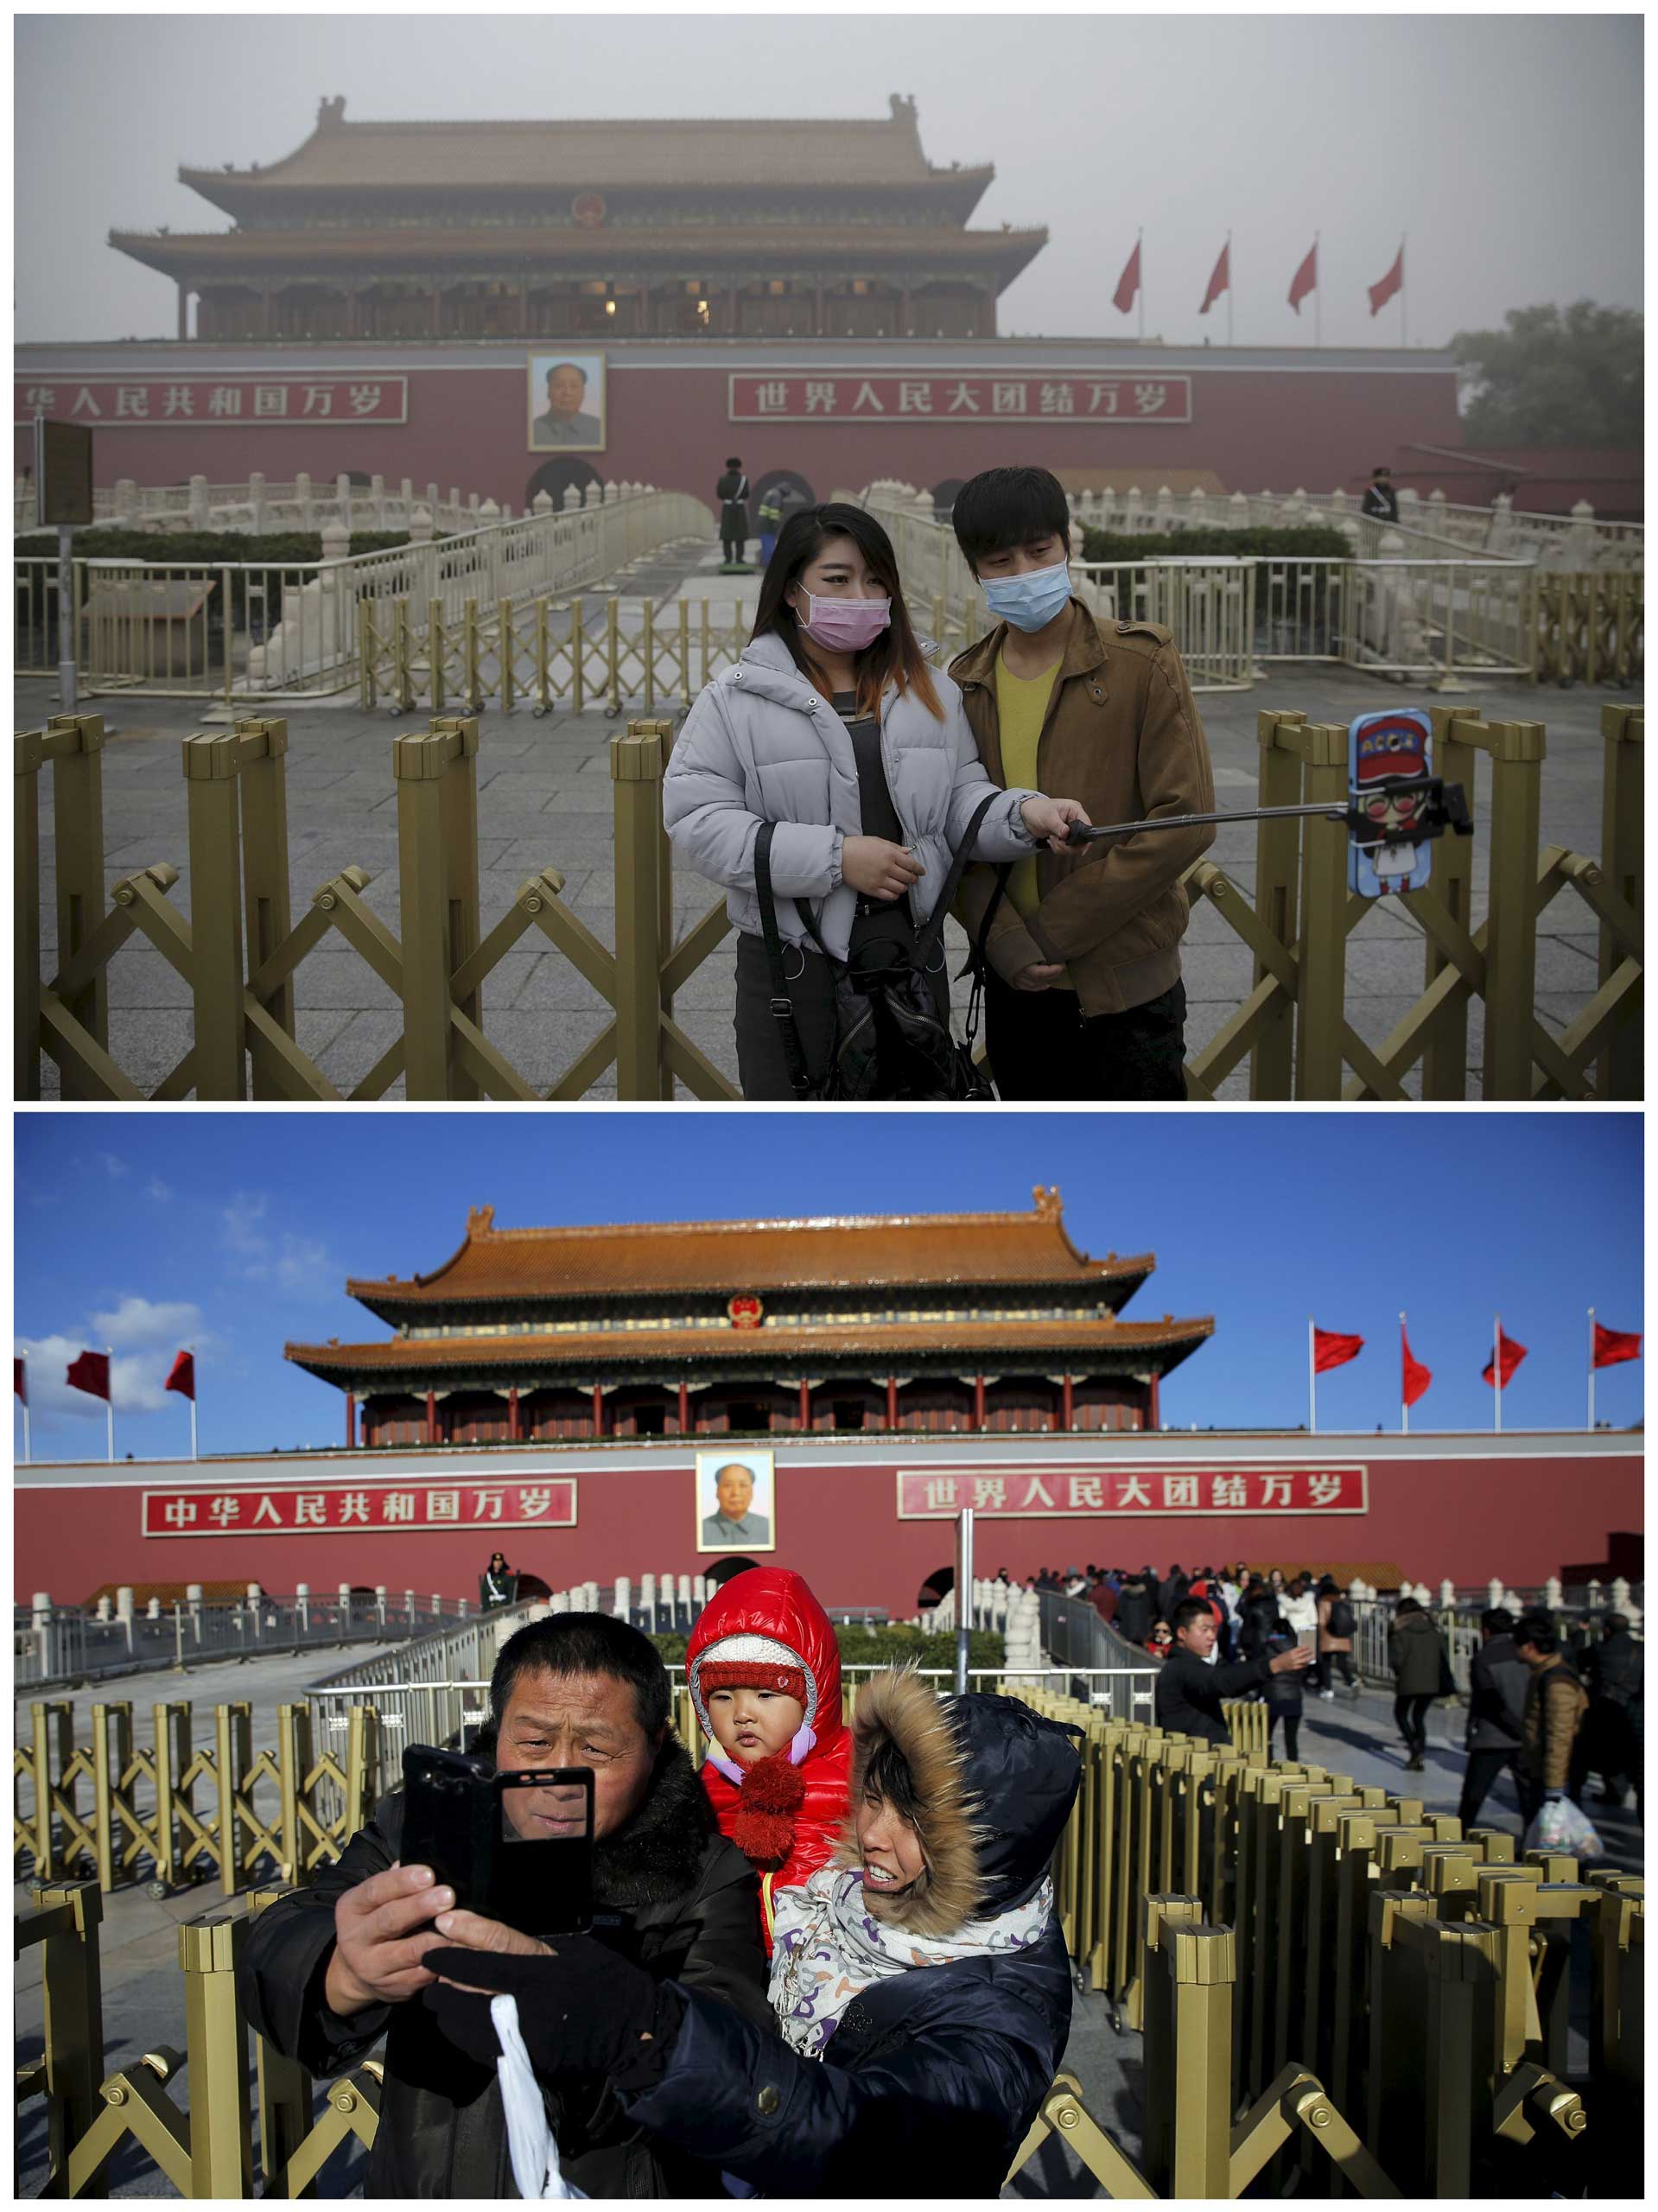 Visitors pose for photographs in front of the Tiananmen Gate and the giant portrait of Mao Zedong on a smoggy day on Dec. 1, and a day later.